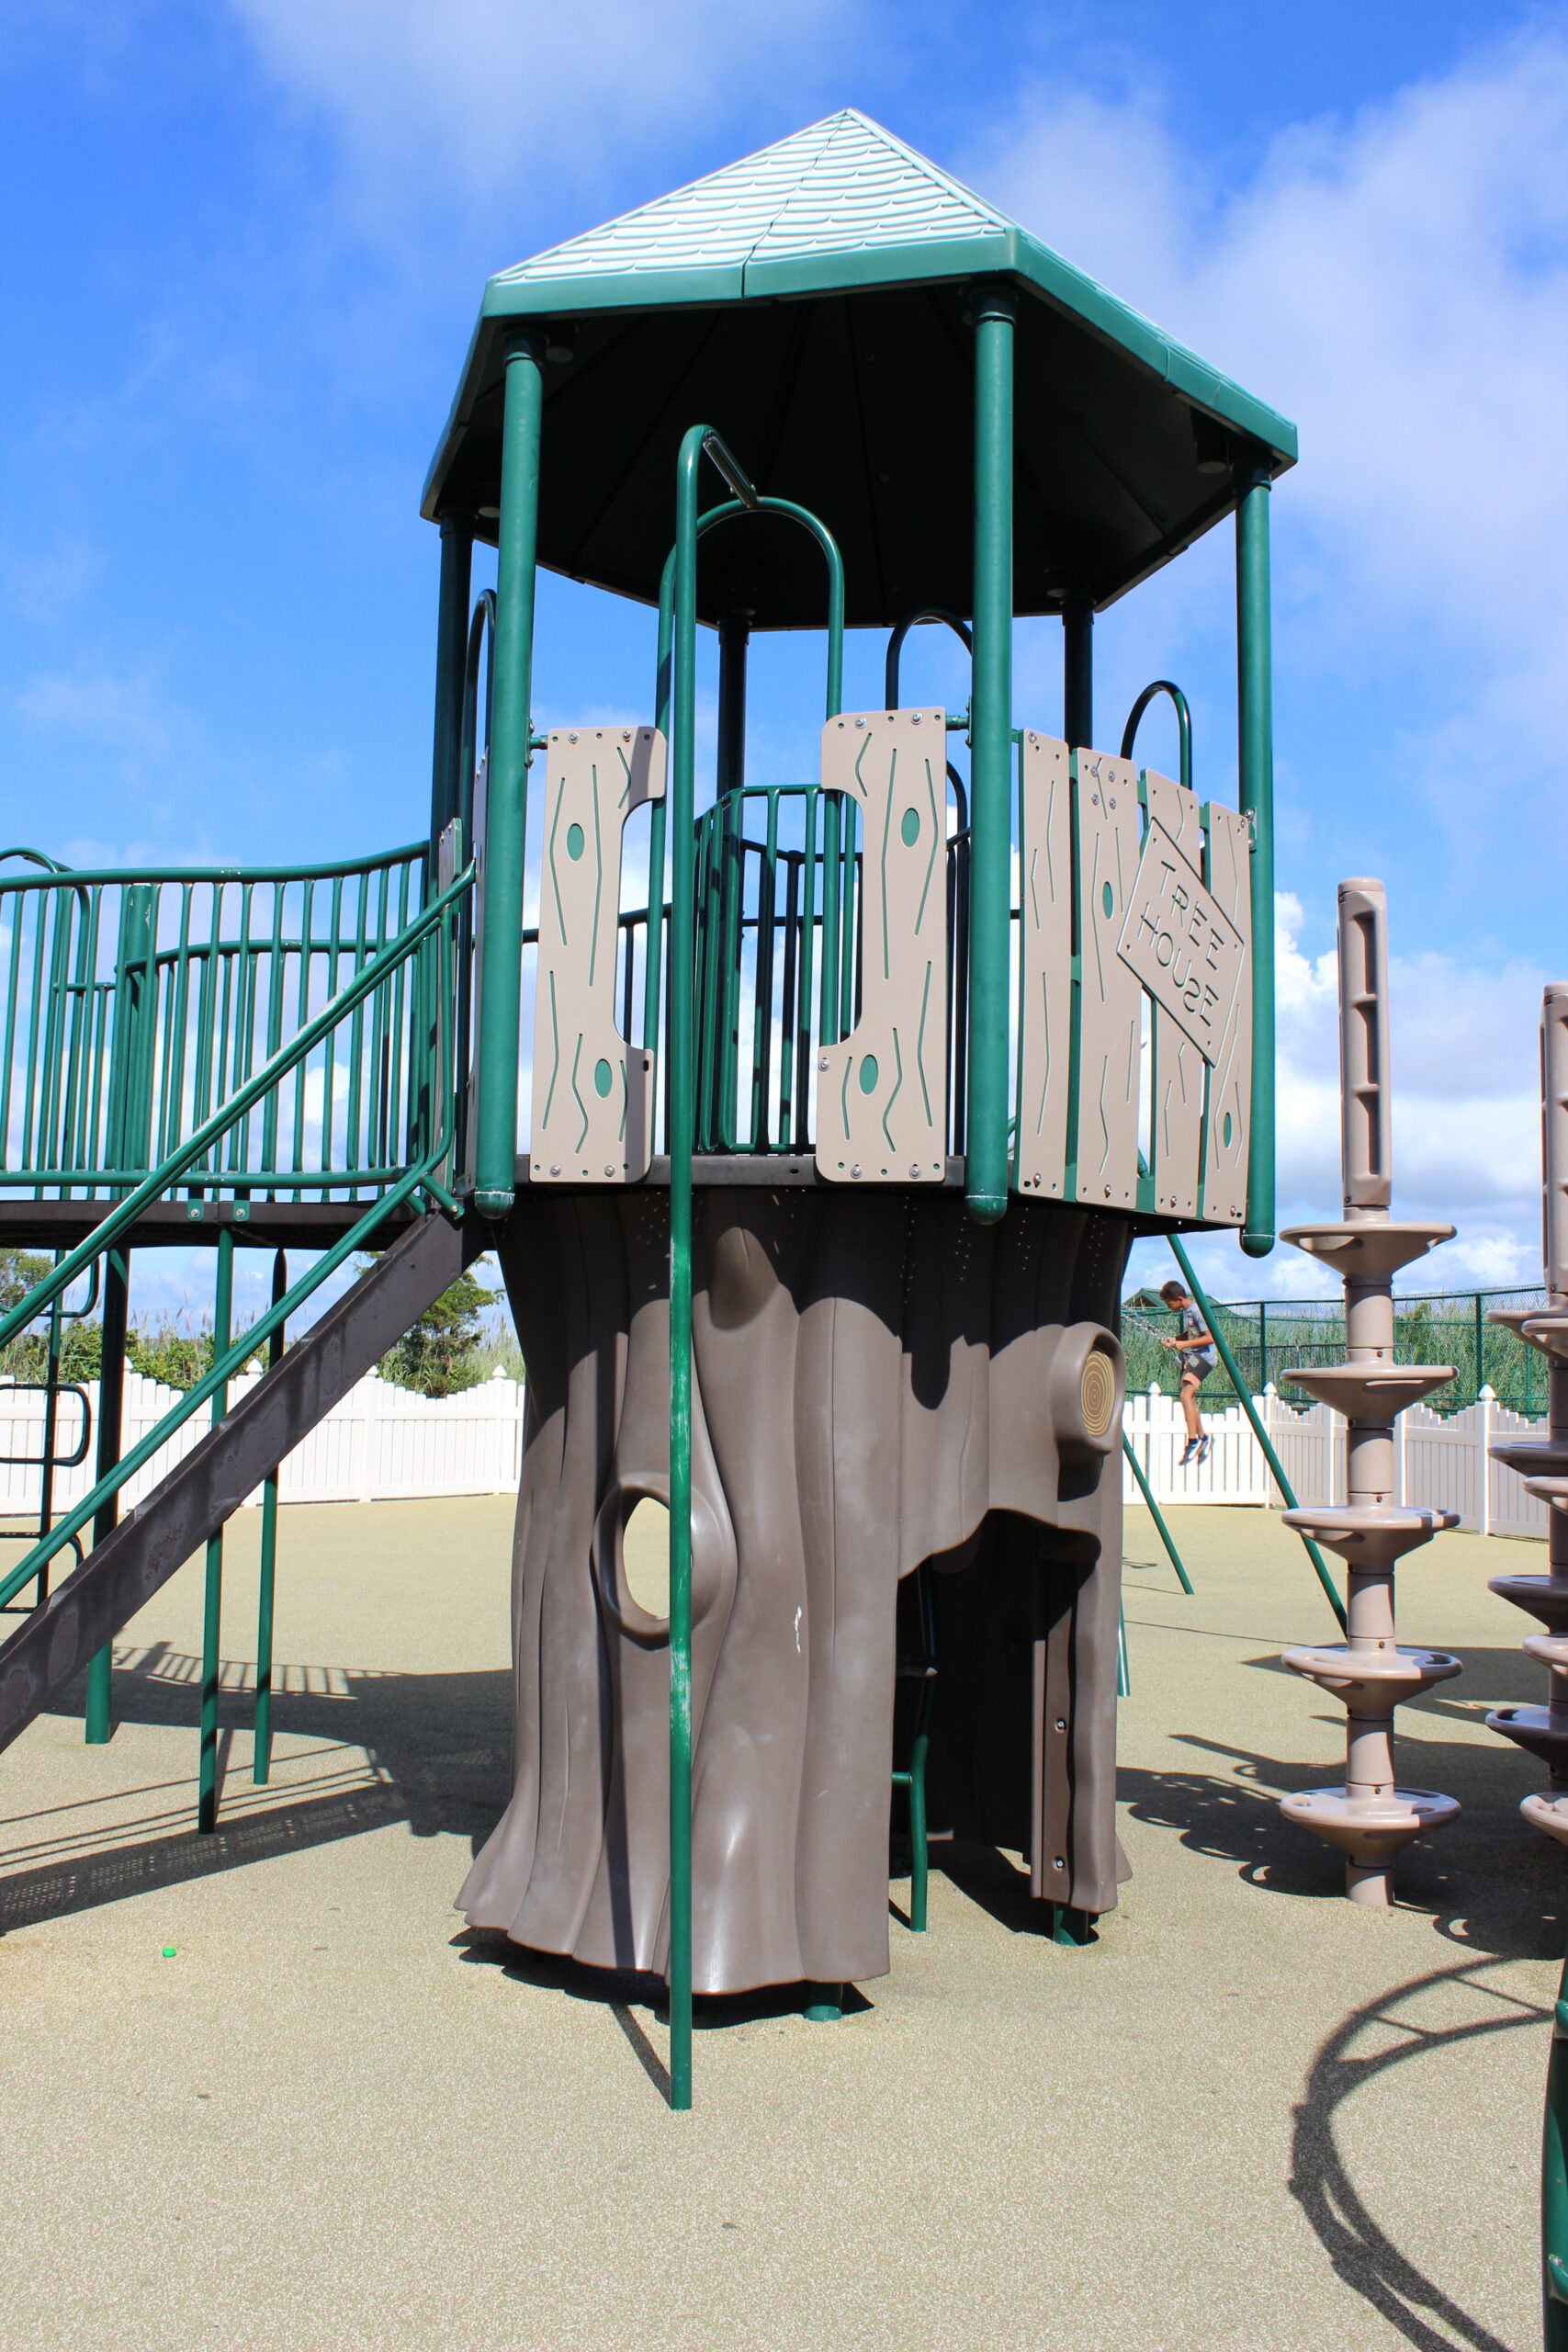 Dealy Field Playground in Sea Isle City NJ - Features - Treehouse with fireman's pole